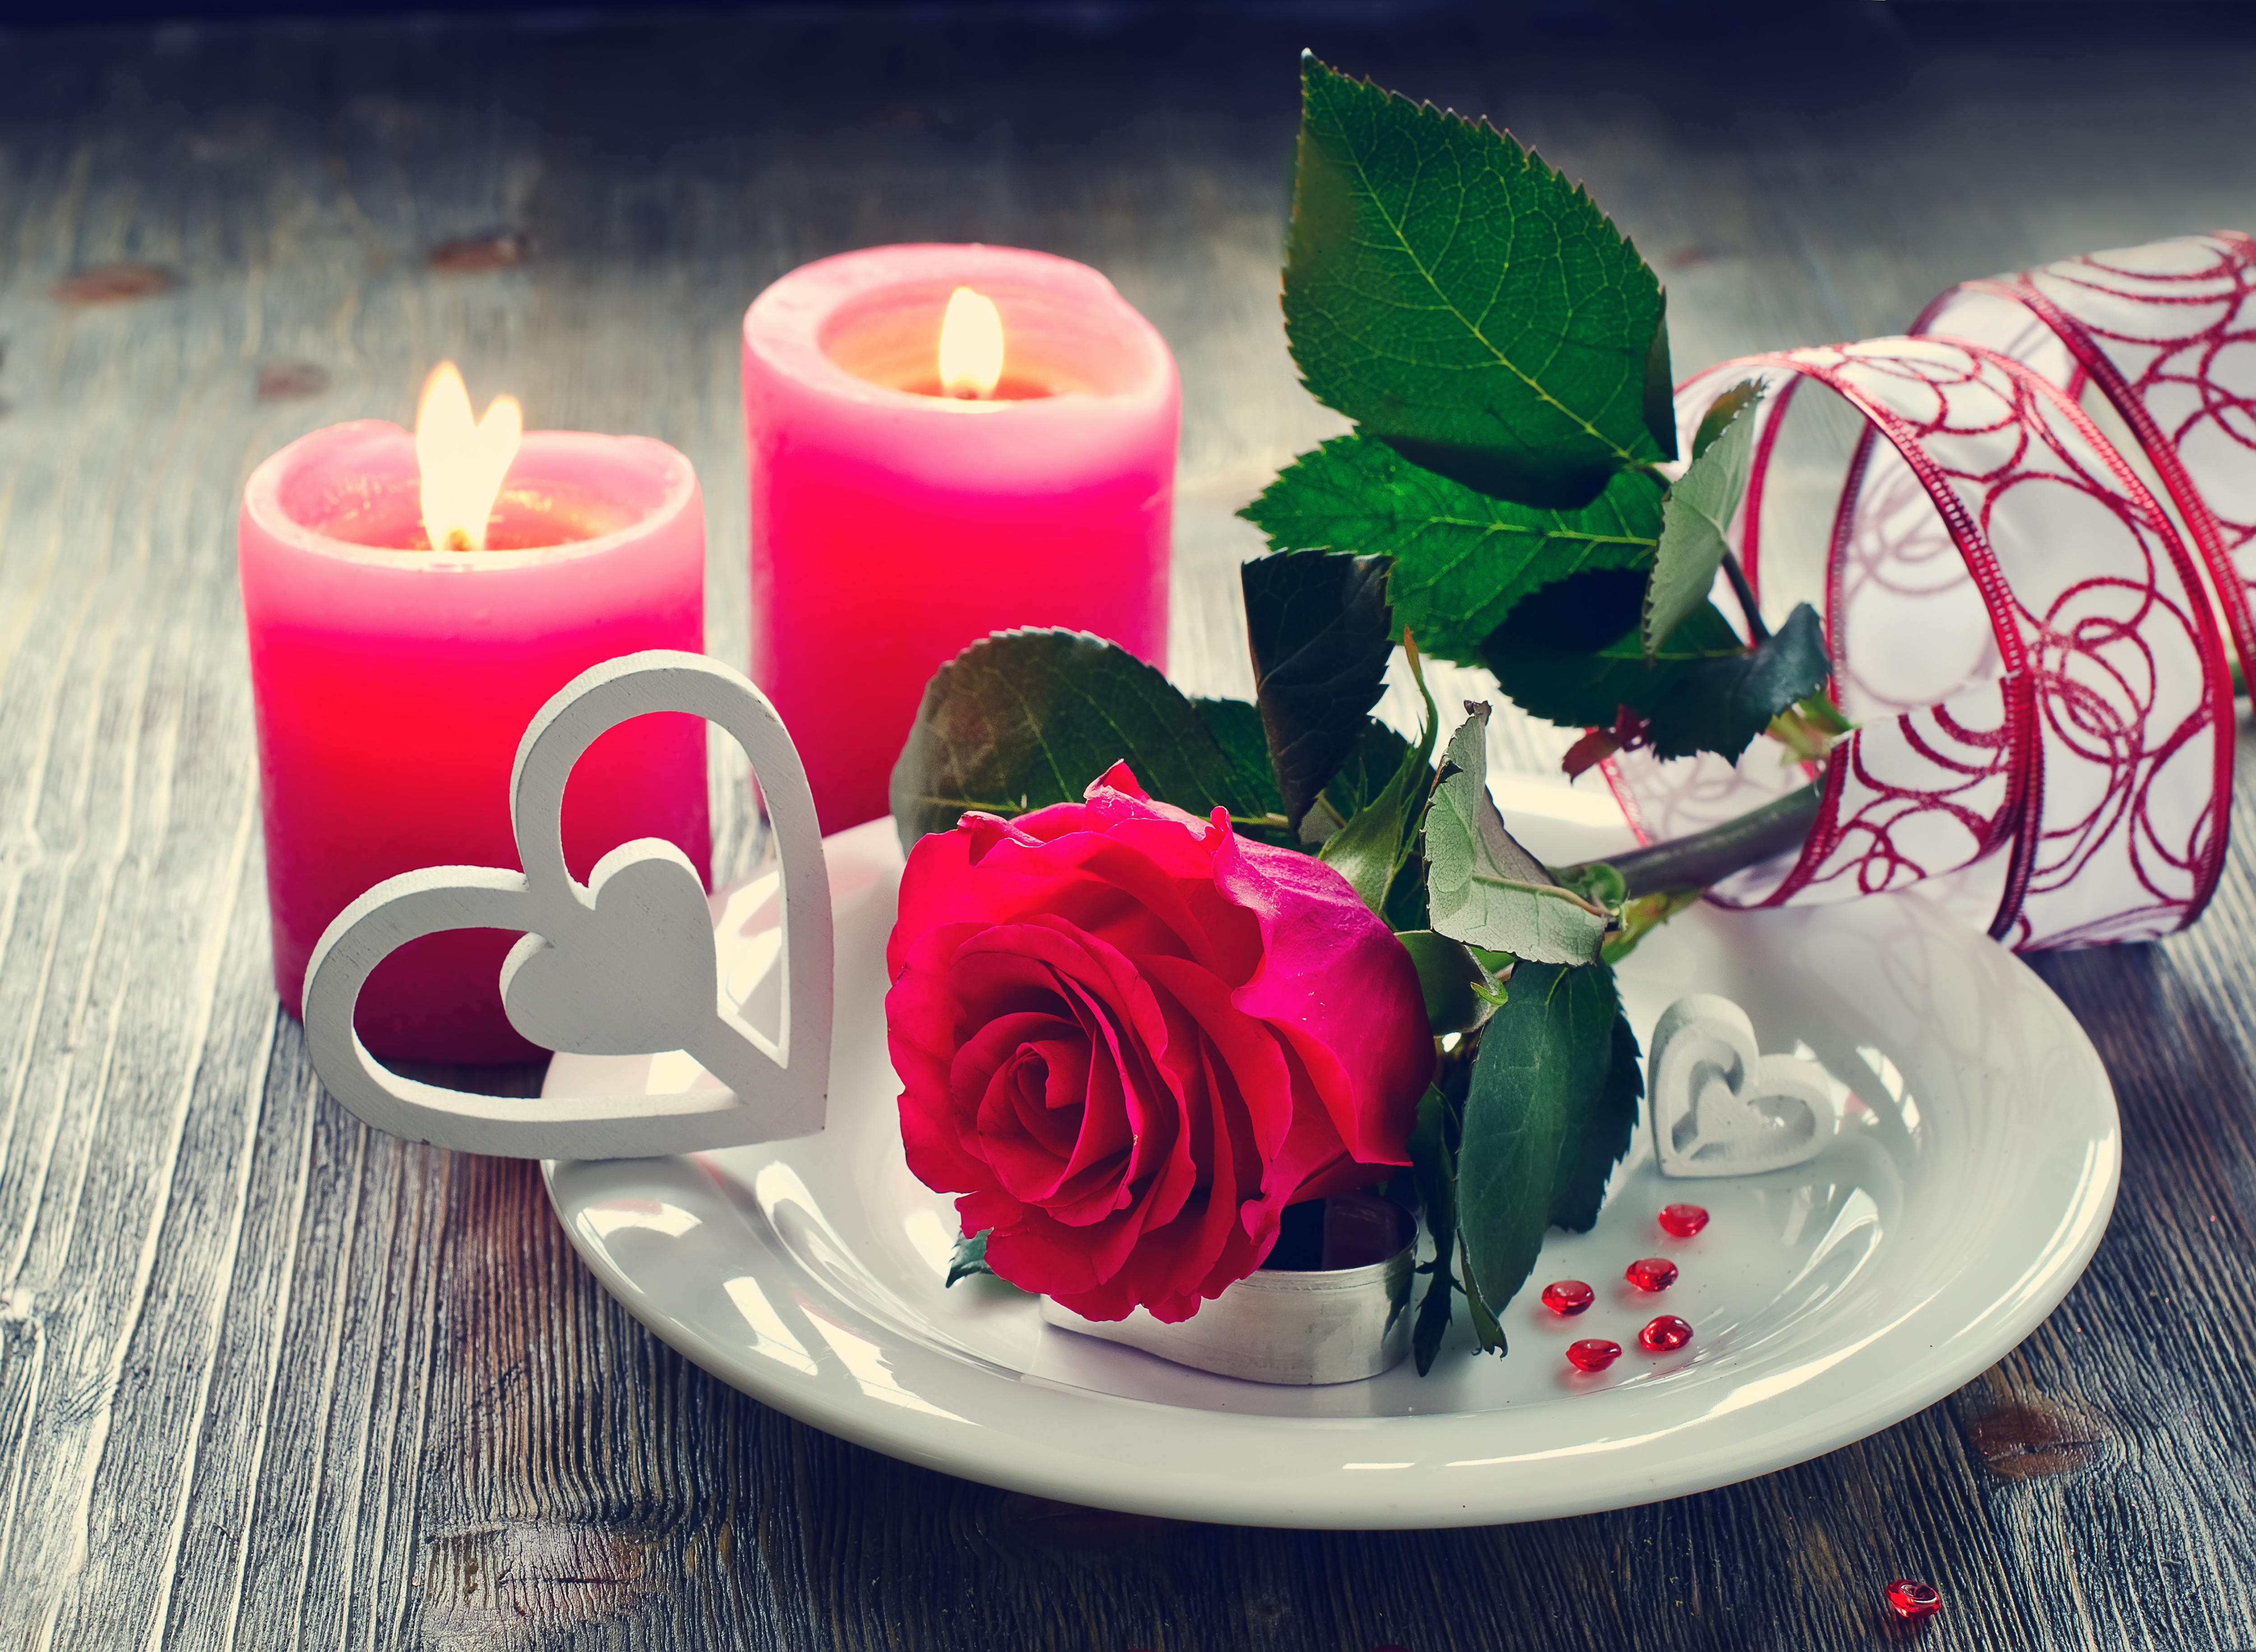 Free photo A red rose lies in a plate next to burning candles